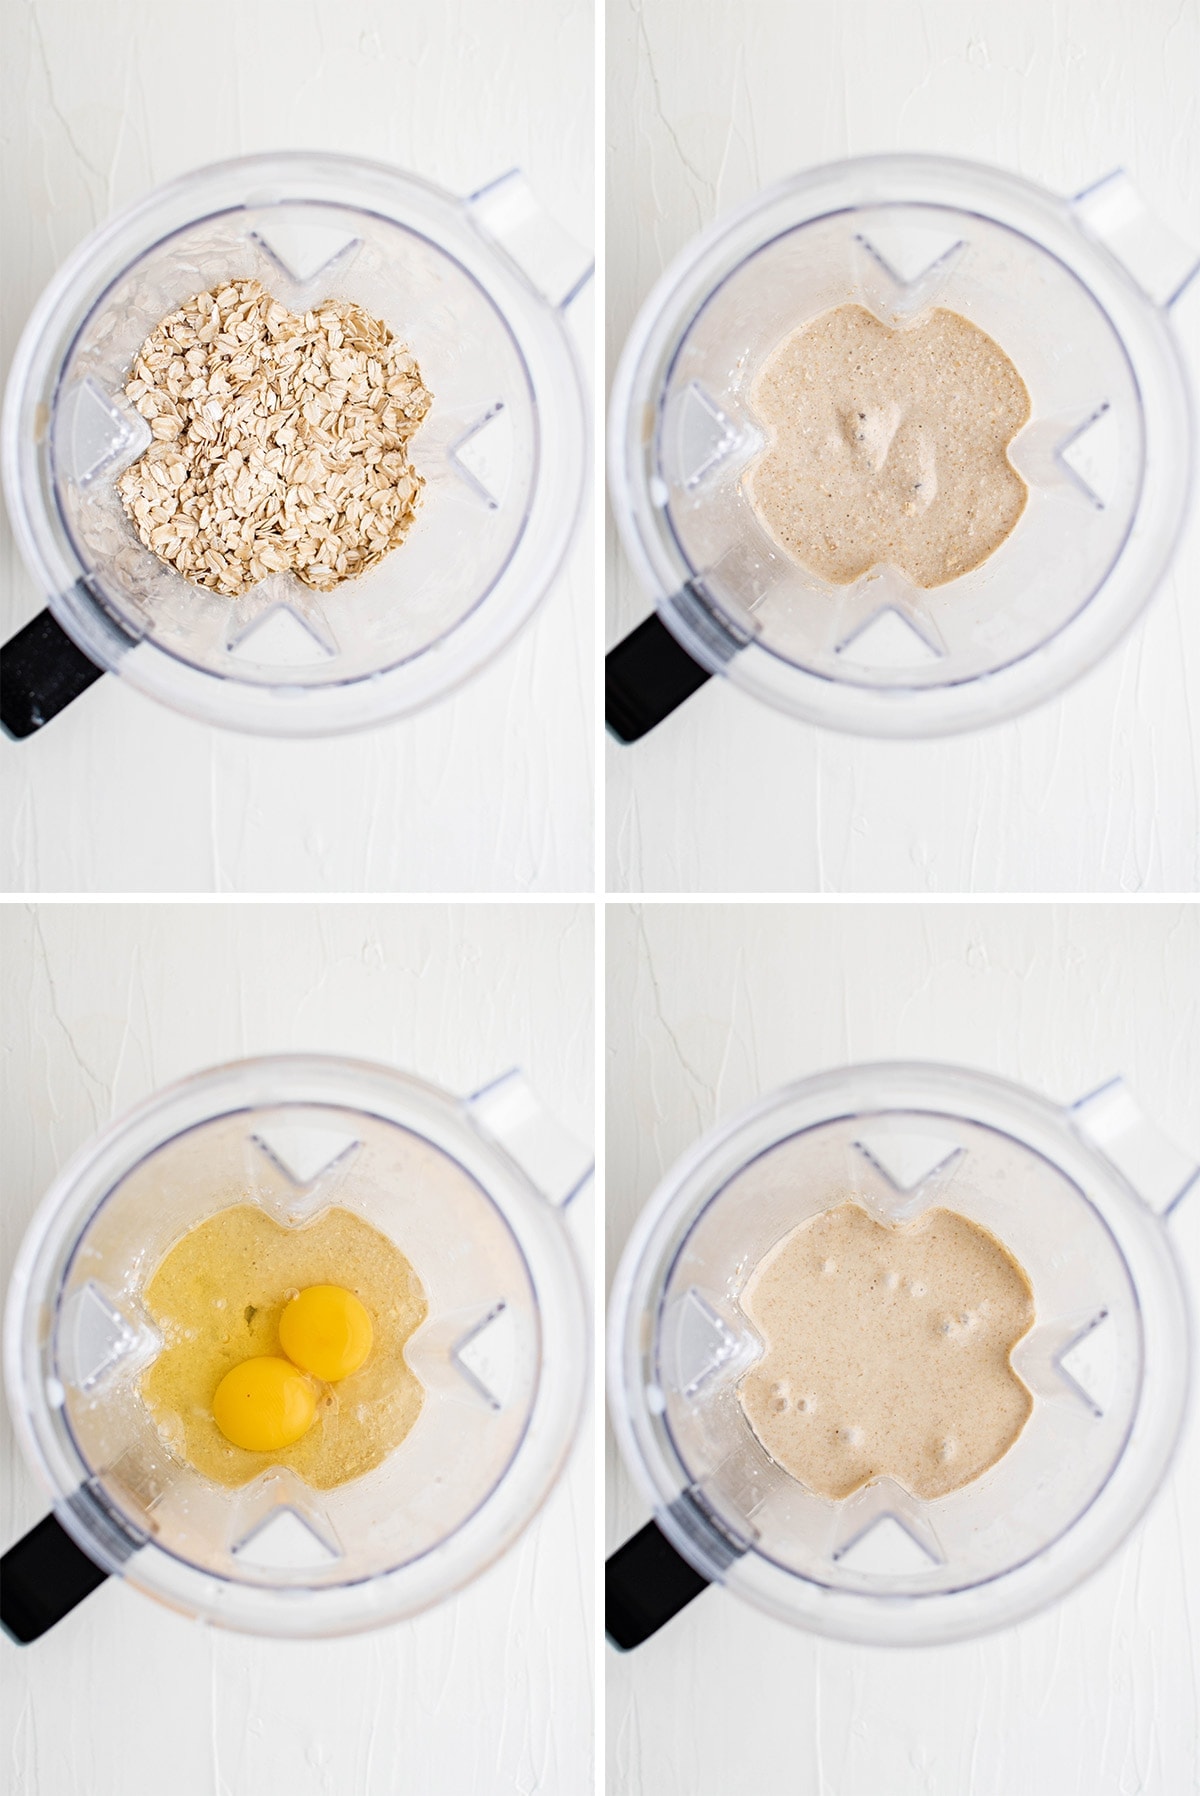 a colage of 4 images showing a blending with different ingredients for oatmeal pancakes